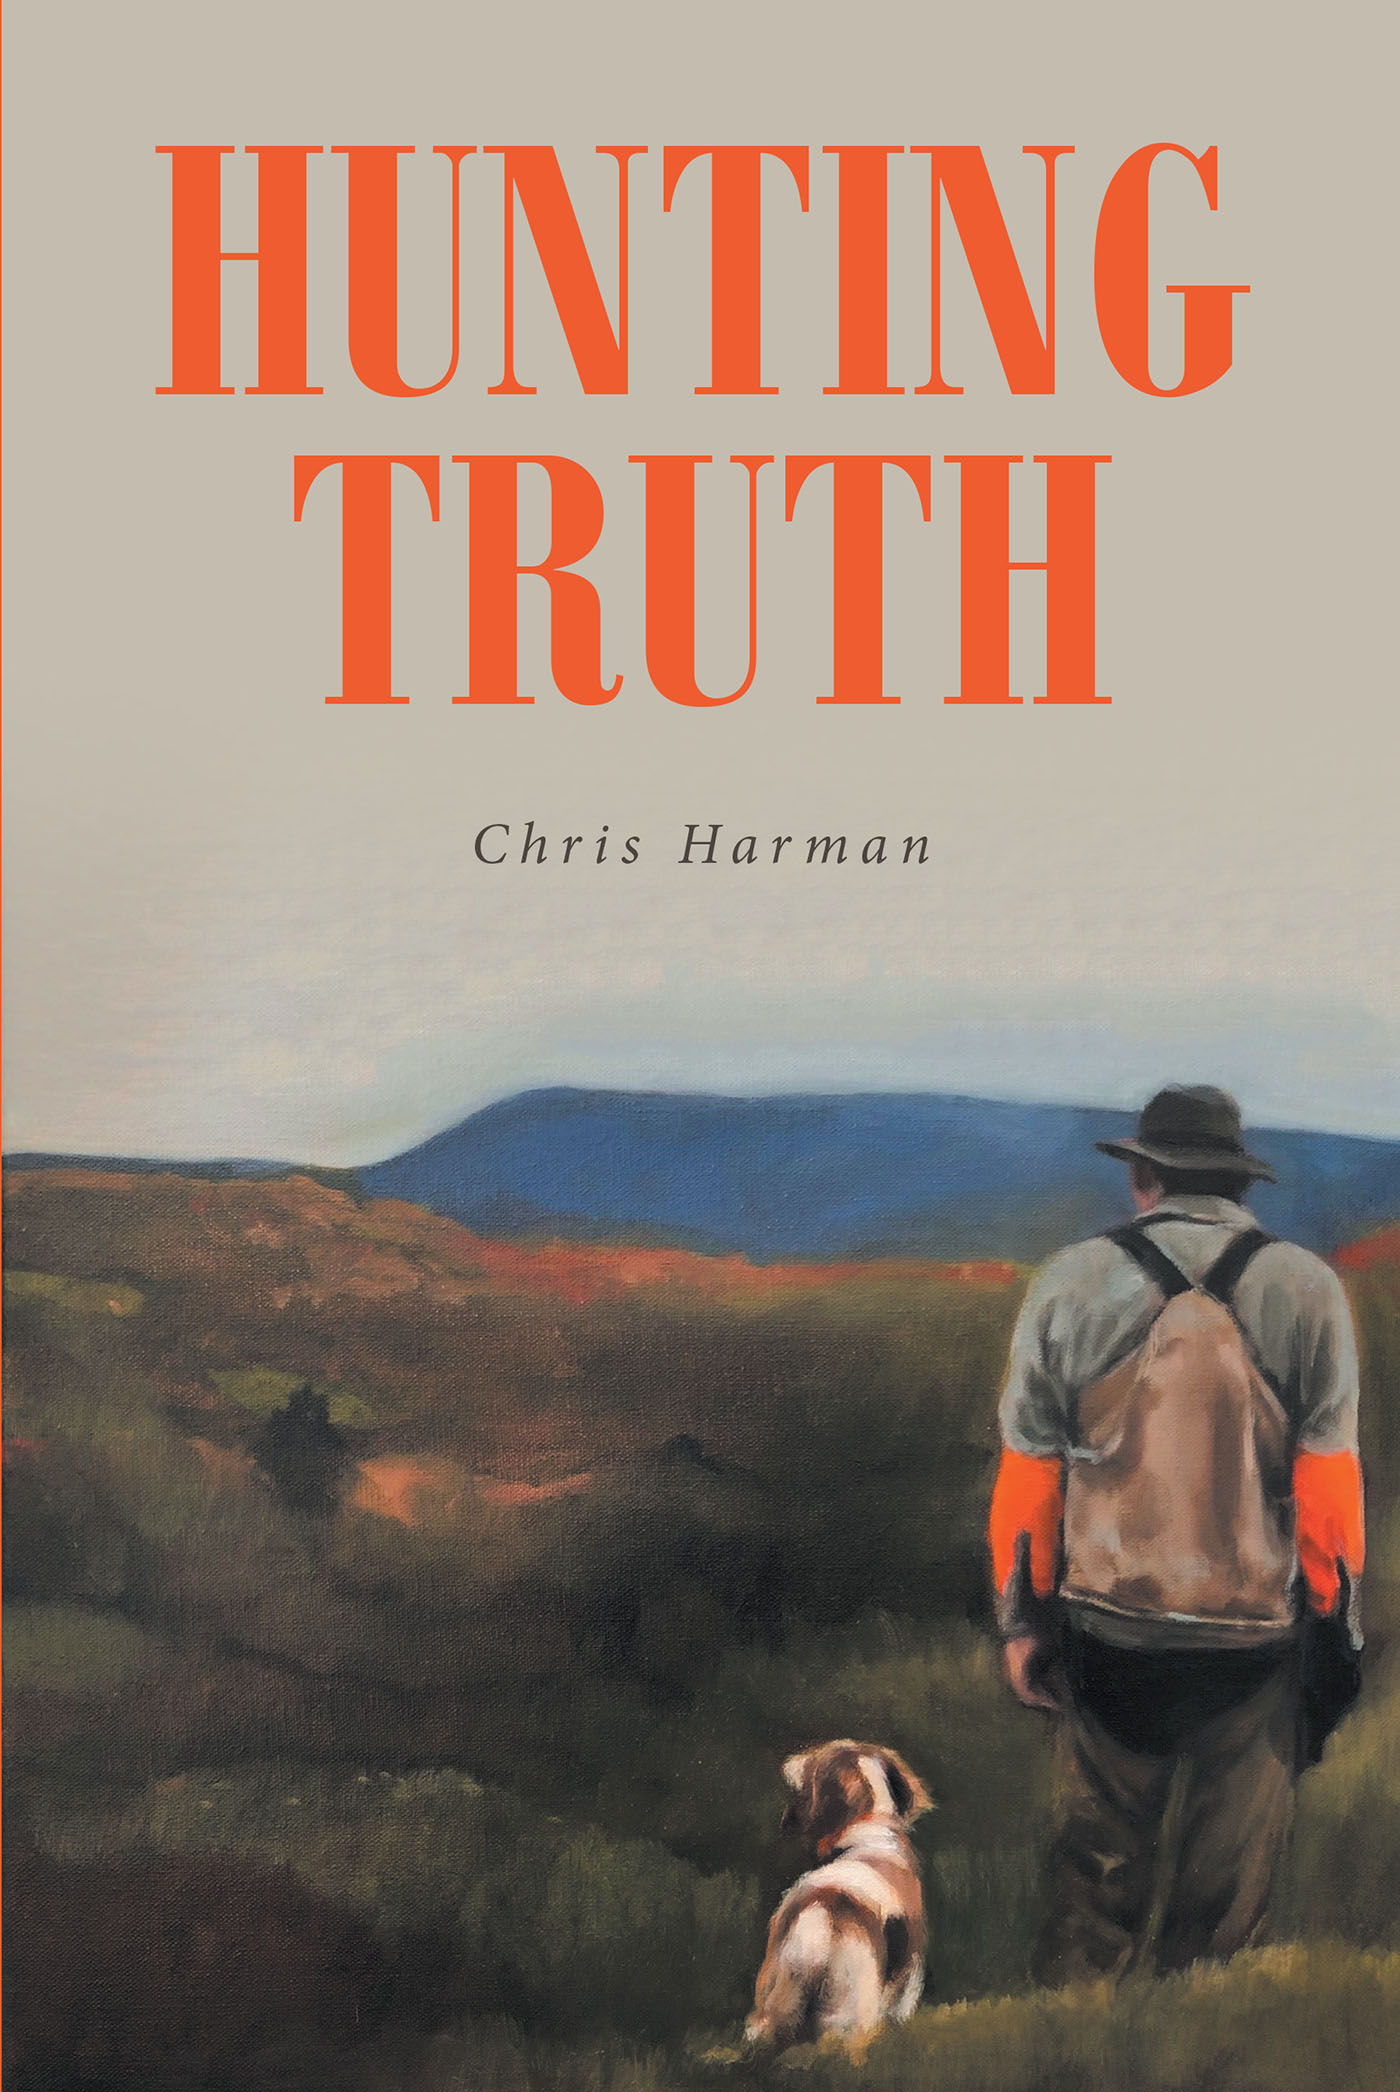 Author Chris Harman’s New Book, "Hunting Truth," Shows How Simple Pleasures in Nature Can Lead to a Deeper Personal Relationship with Jesus Christ